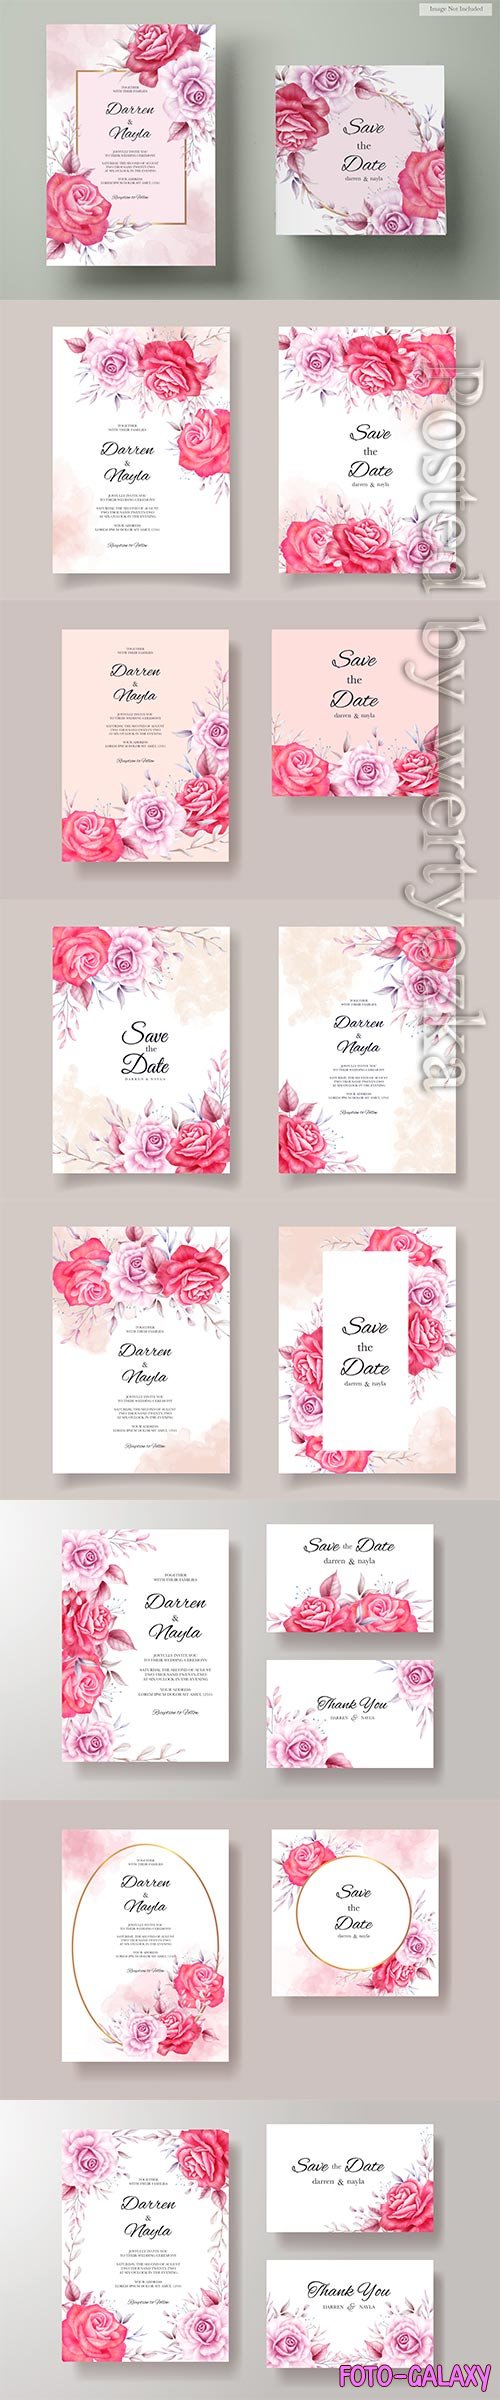 Beautiful wedding invitation with red and purple roses